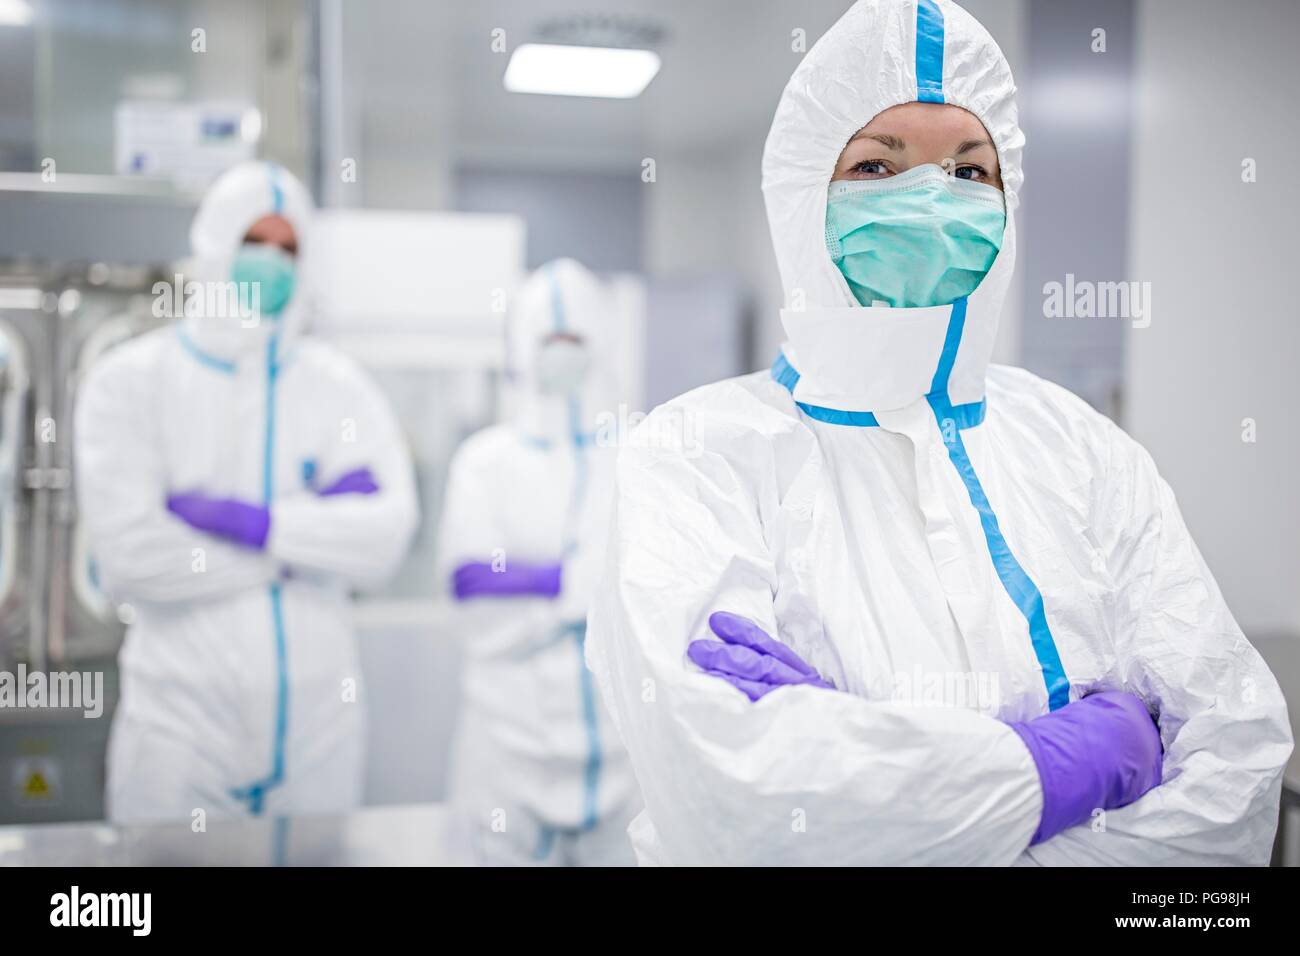 Lab technicians wearing protective suits and face masks in a laboratory that must maintain a sterile environment. Stock Photo